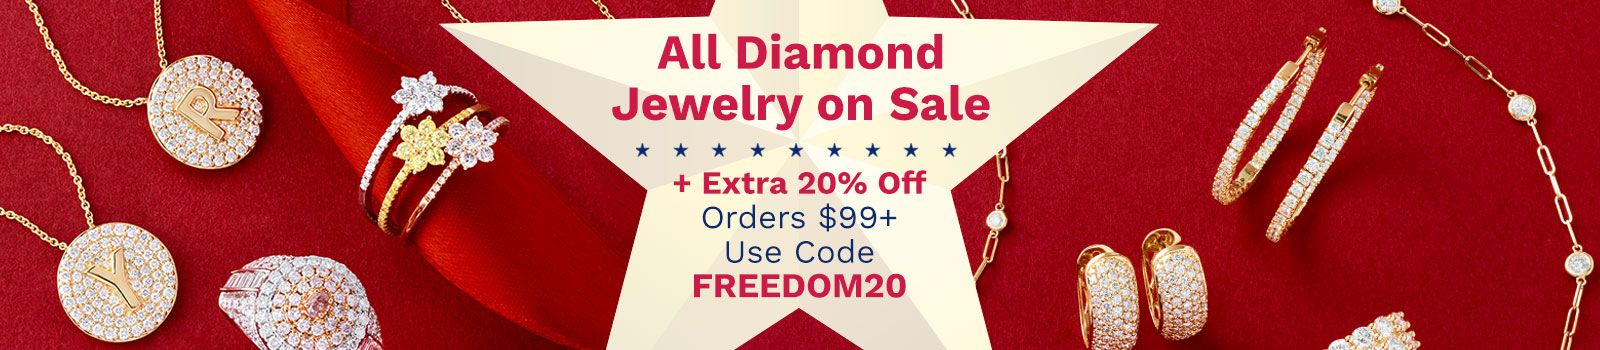 All Diamond Jewelry on Sale  + Extra 20% Off Orders $99+ Use Code: FREEDOM20 | 208-686 206-719 208-688 208-076 208-074